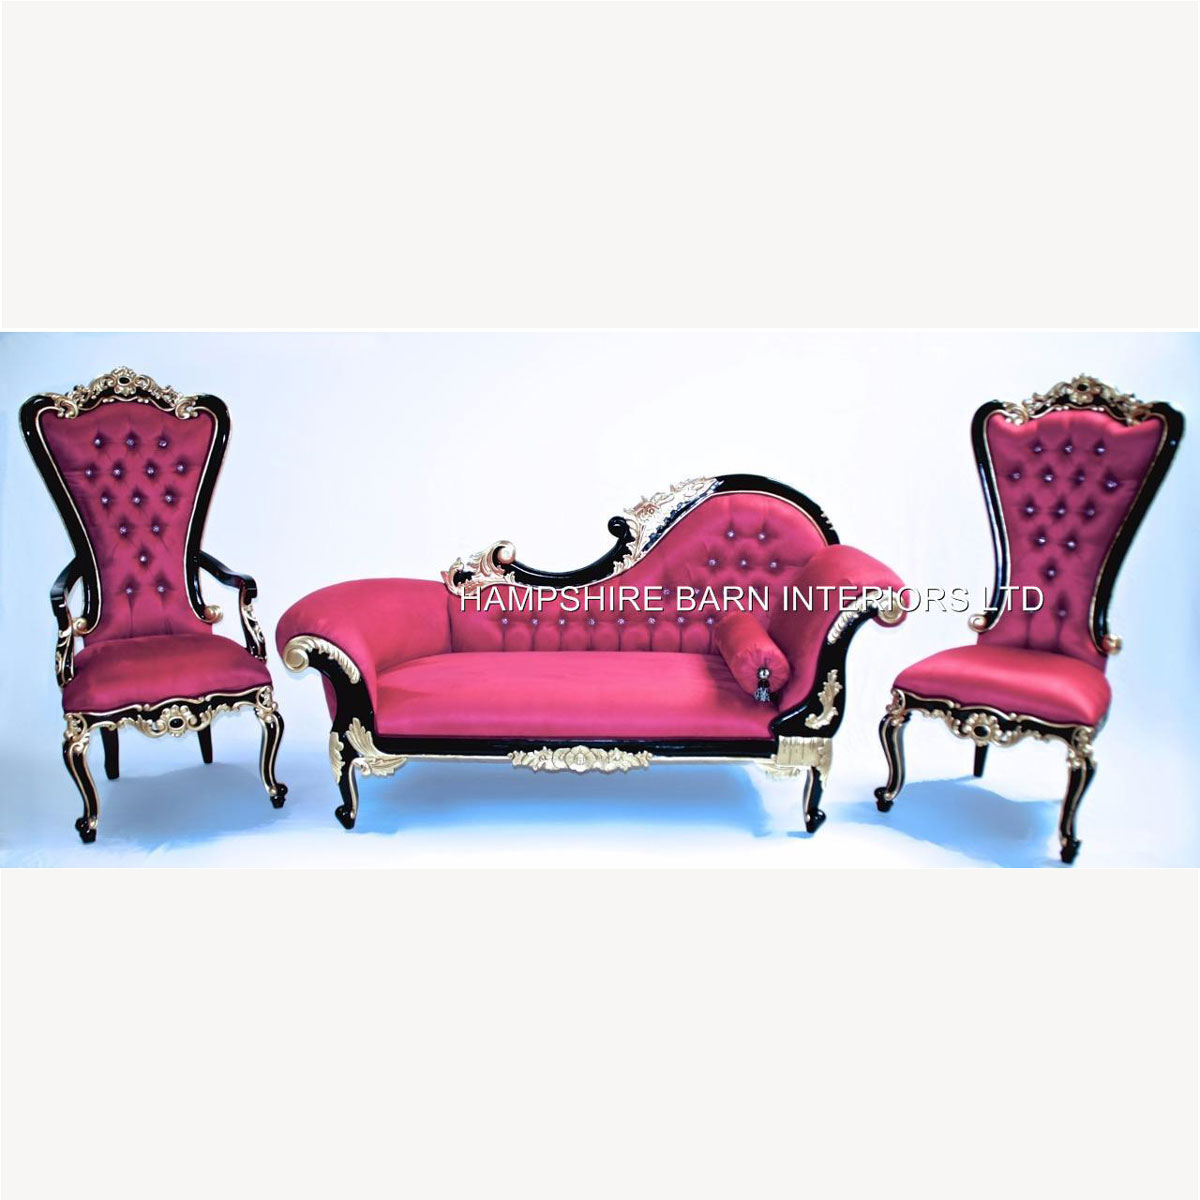 Beautiful Fuchsia Pink Hampshire Chaise With Black Frame With Ornate Gold Highlights With Crystals 5 - Hampshire Barn Interiors - Beautiful Fuchsia Pink Hampshire Chaise With Black Frame With Ornate Gold Highlights With Crystals -